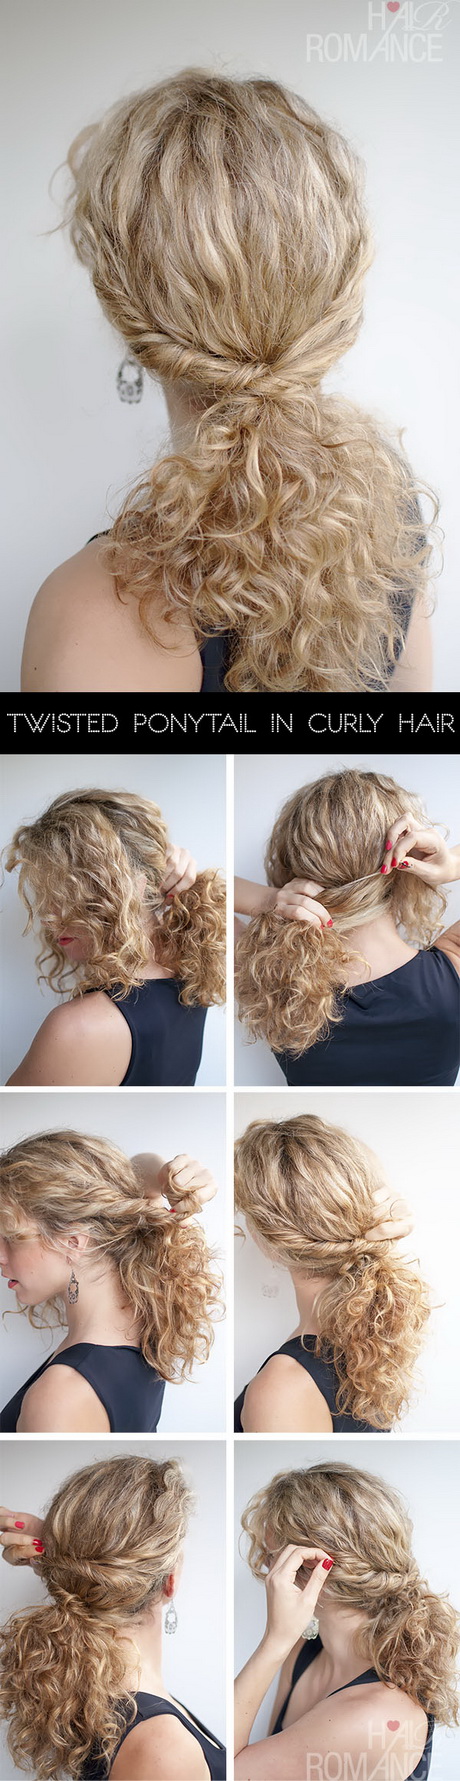 Step by step curly hairstyles step-by-step-curly-hairstyles-90-2